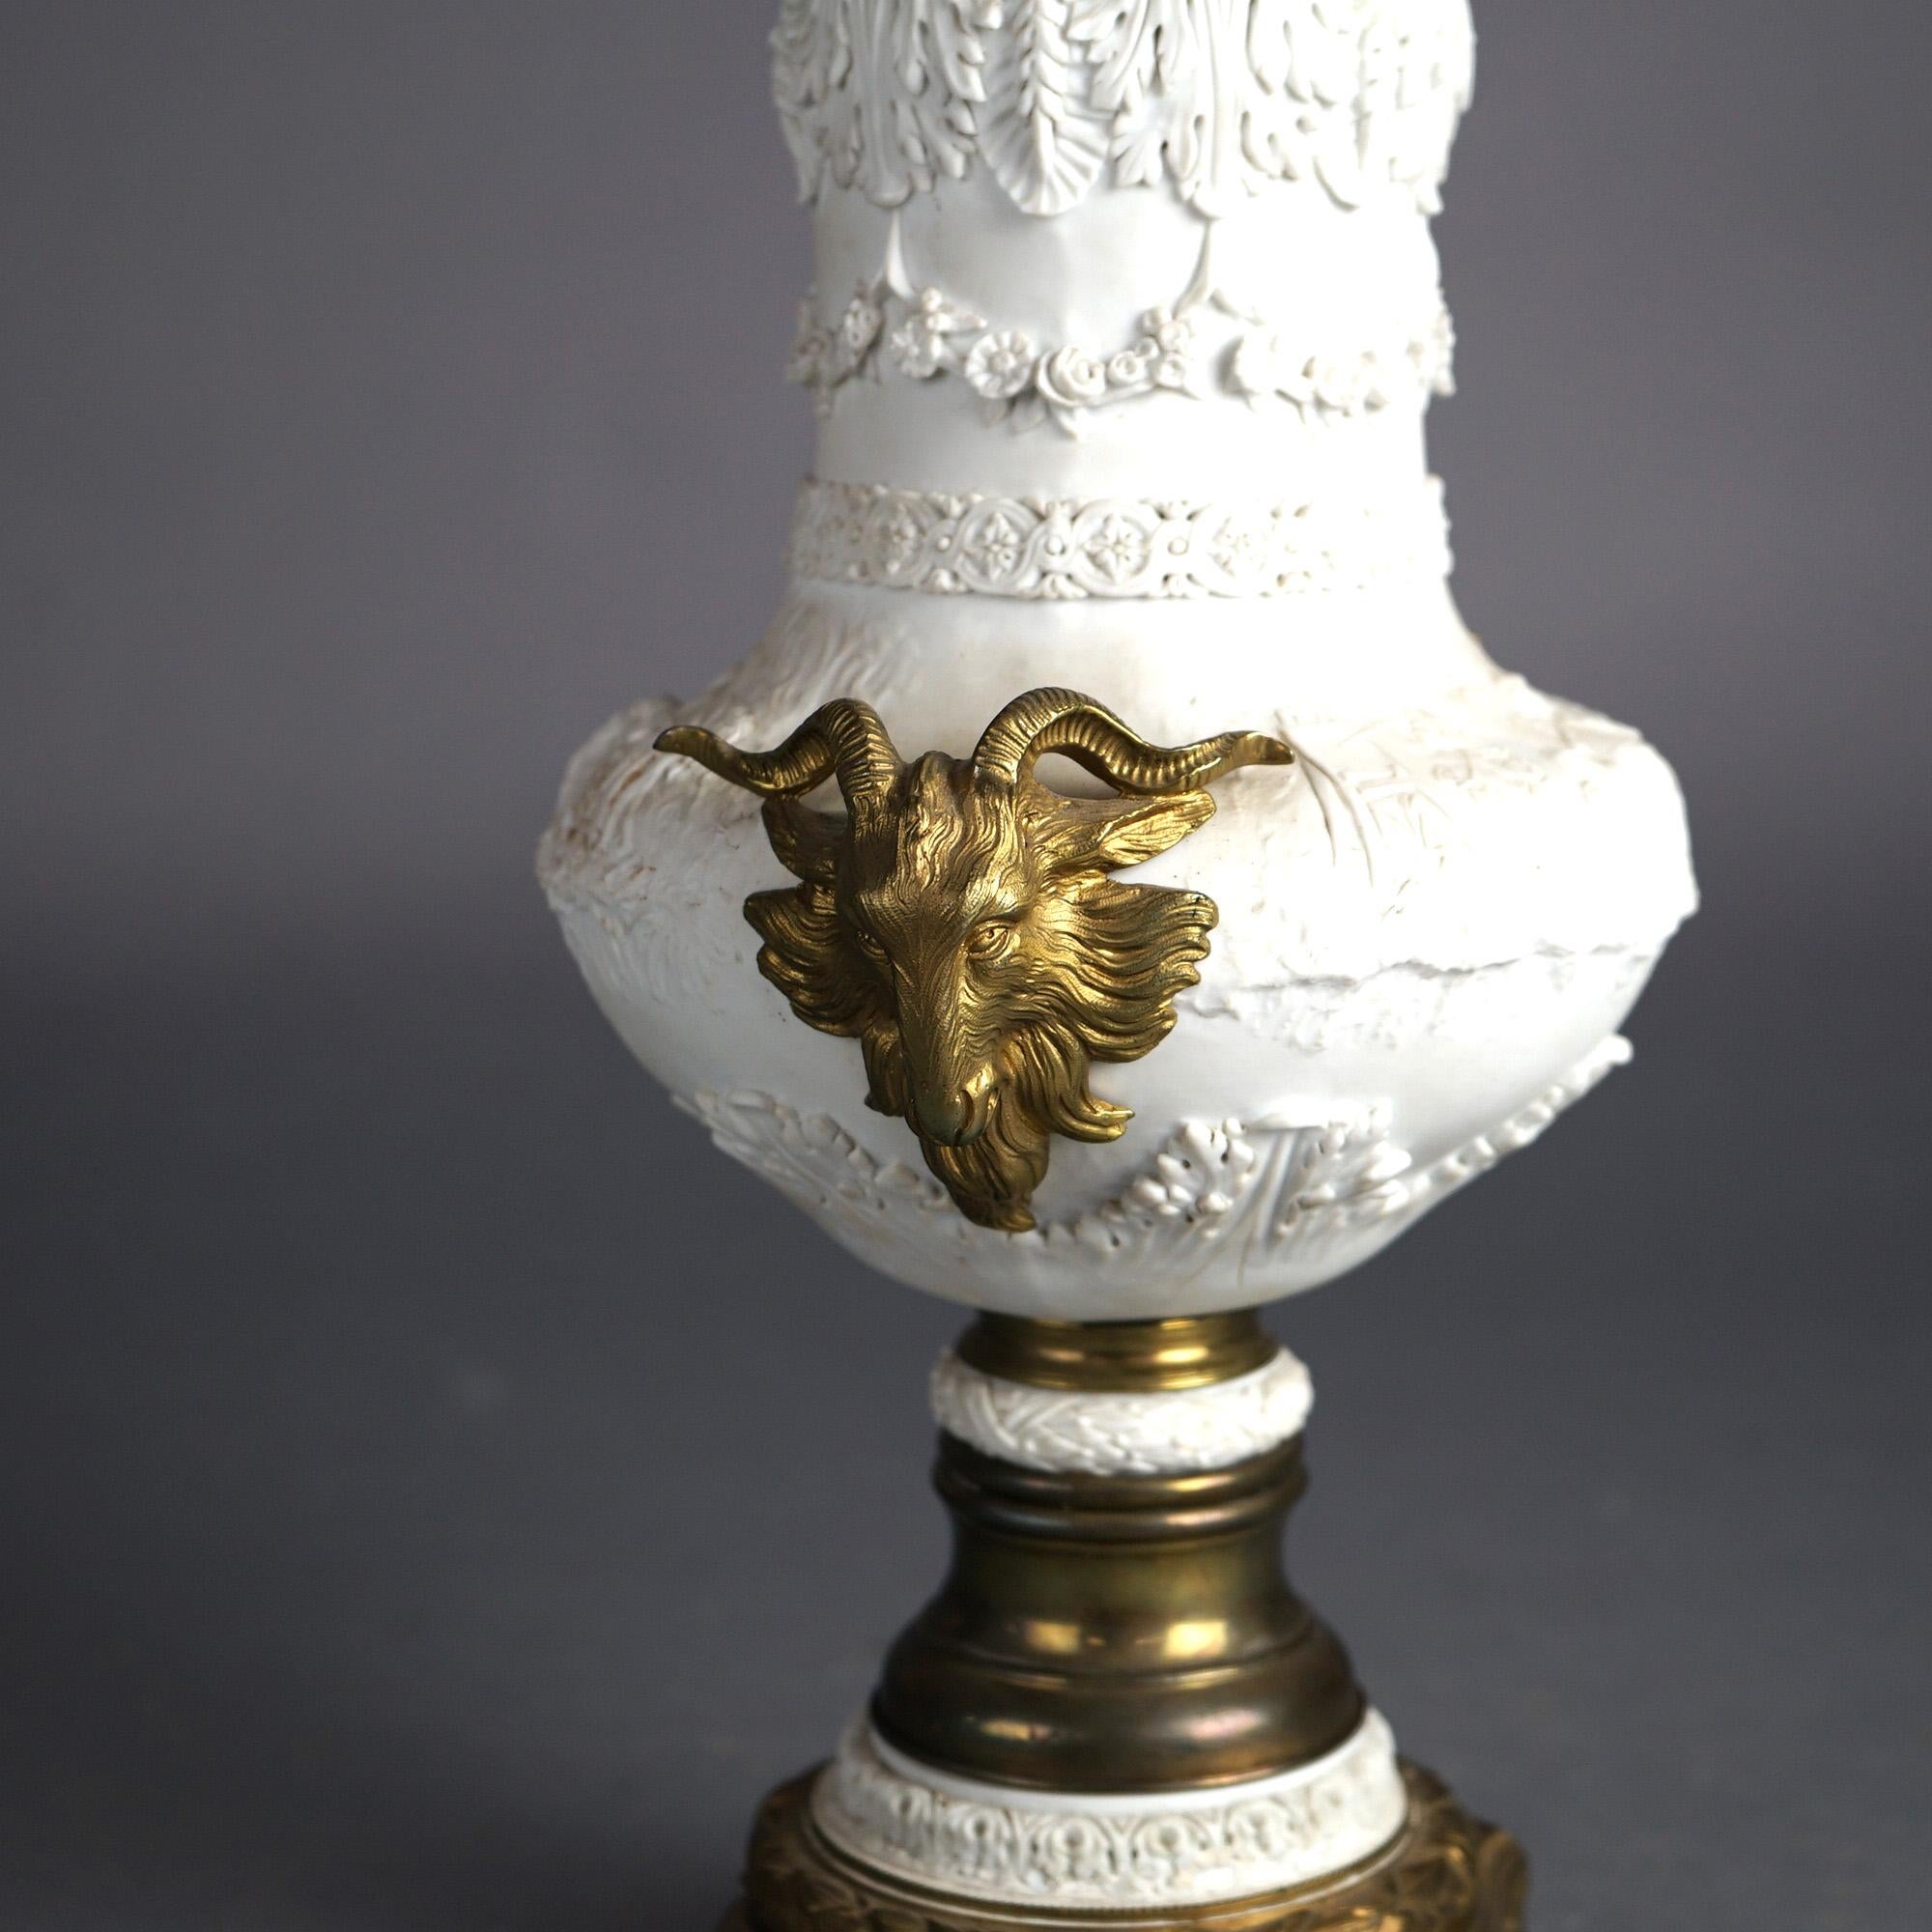 Antique French Sevres Figural Neoclassical Cherubi of the Arts Bisque Urn with Bronze Satyr Mounts C1890

Measures- 19.5''H x 8.5''W x 7''D